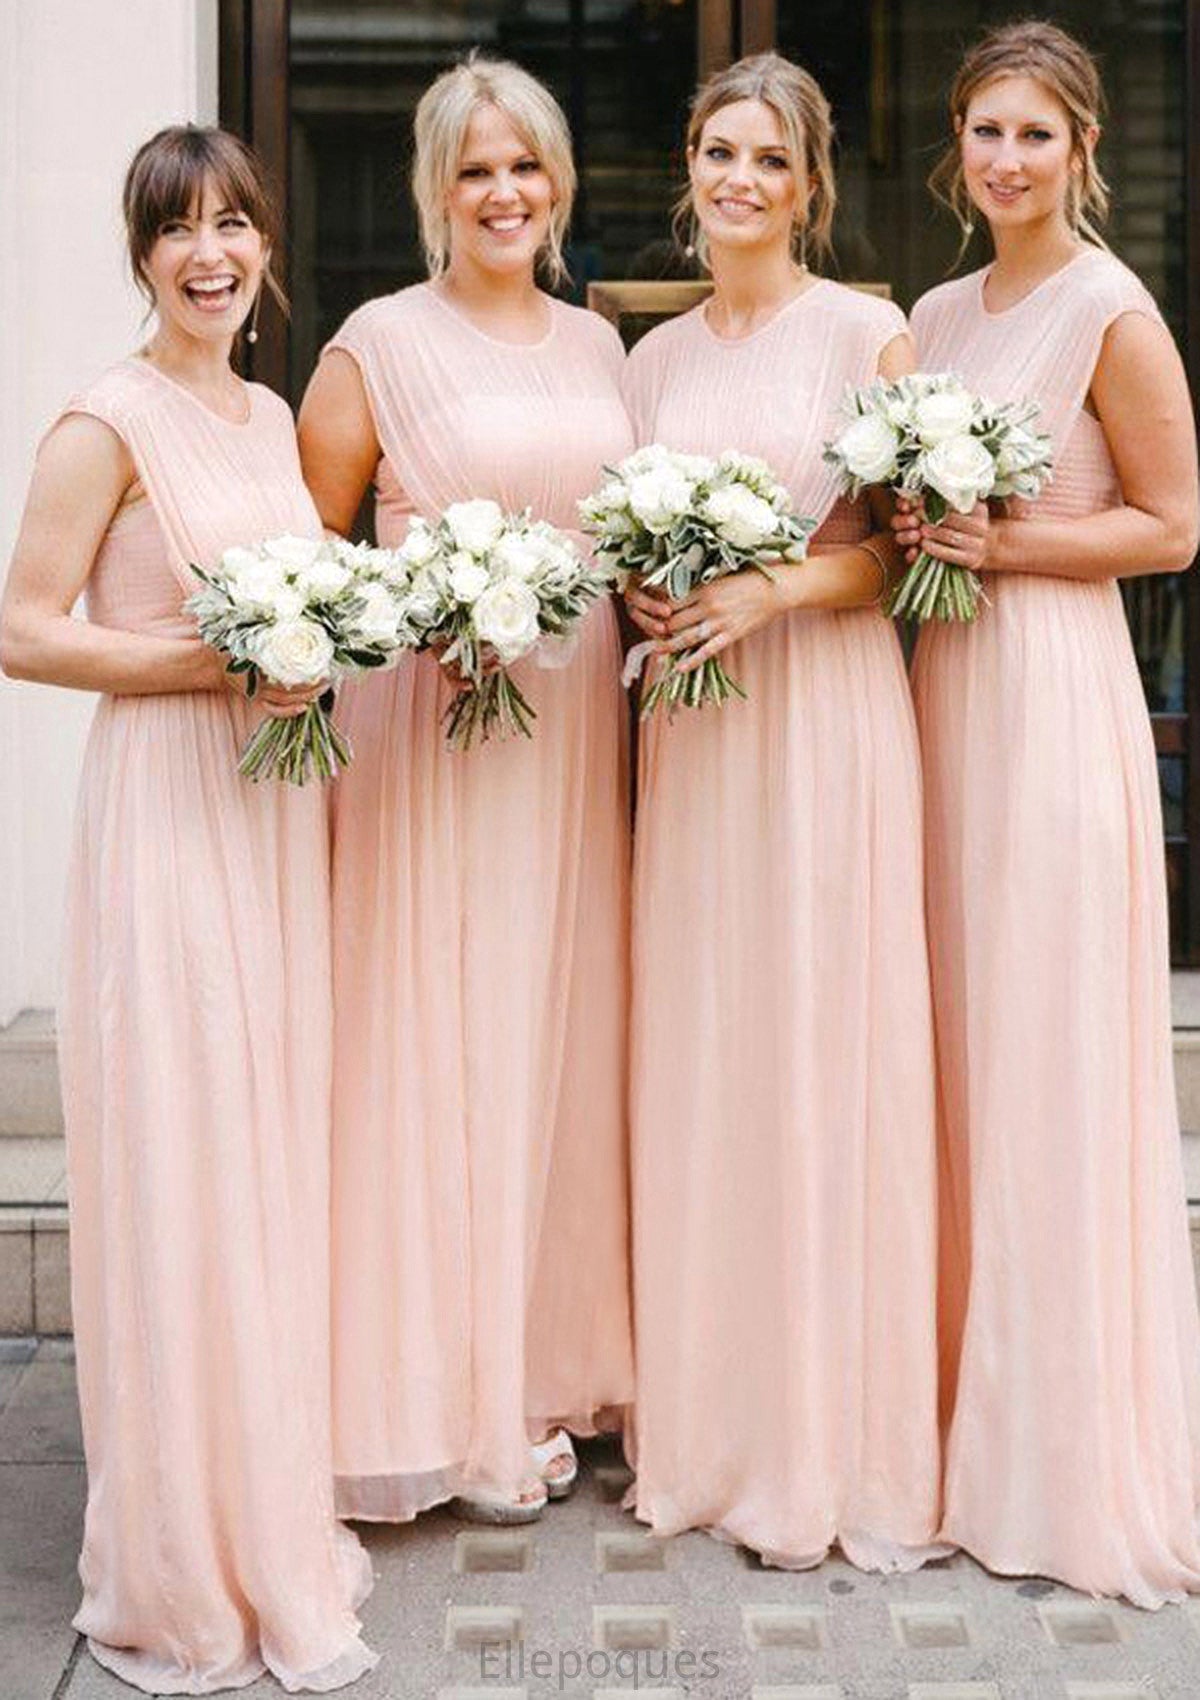 Sleeveless Scoop Neck Long/Floor-Length A-line/Princess Chiffon Bridesmaid Dresseses With Pleated Patricia HOP0025595